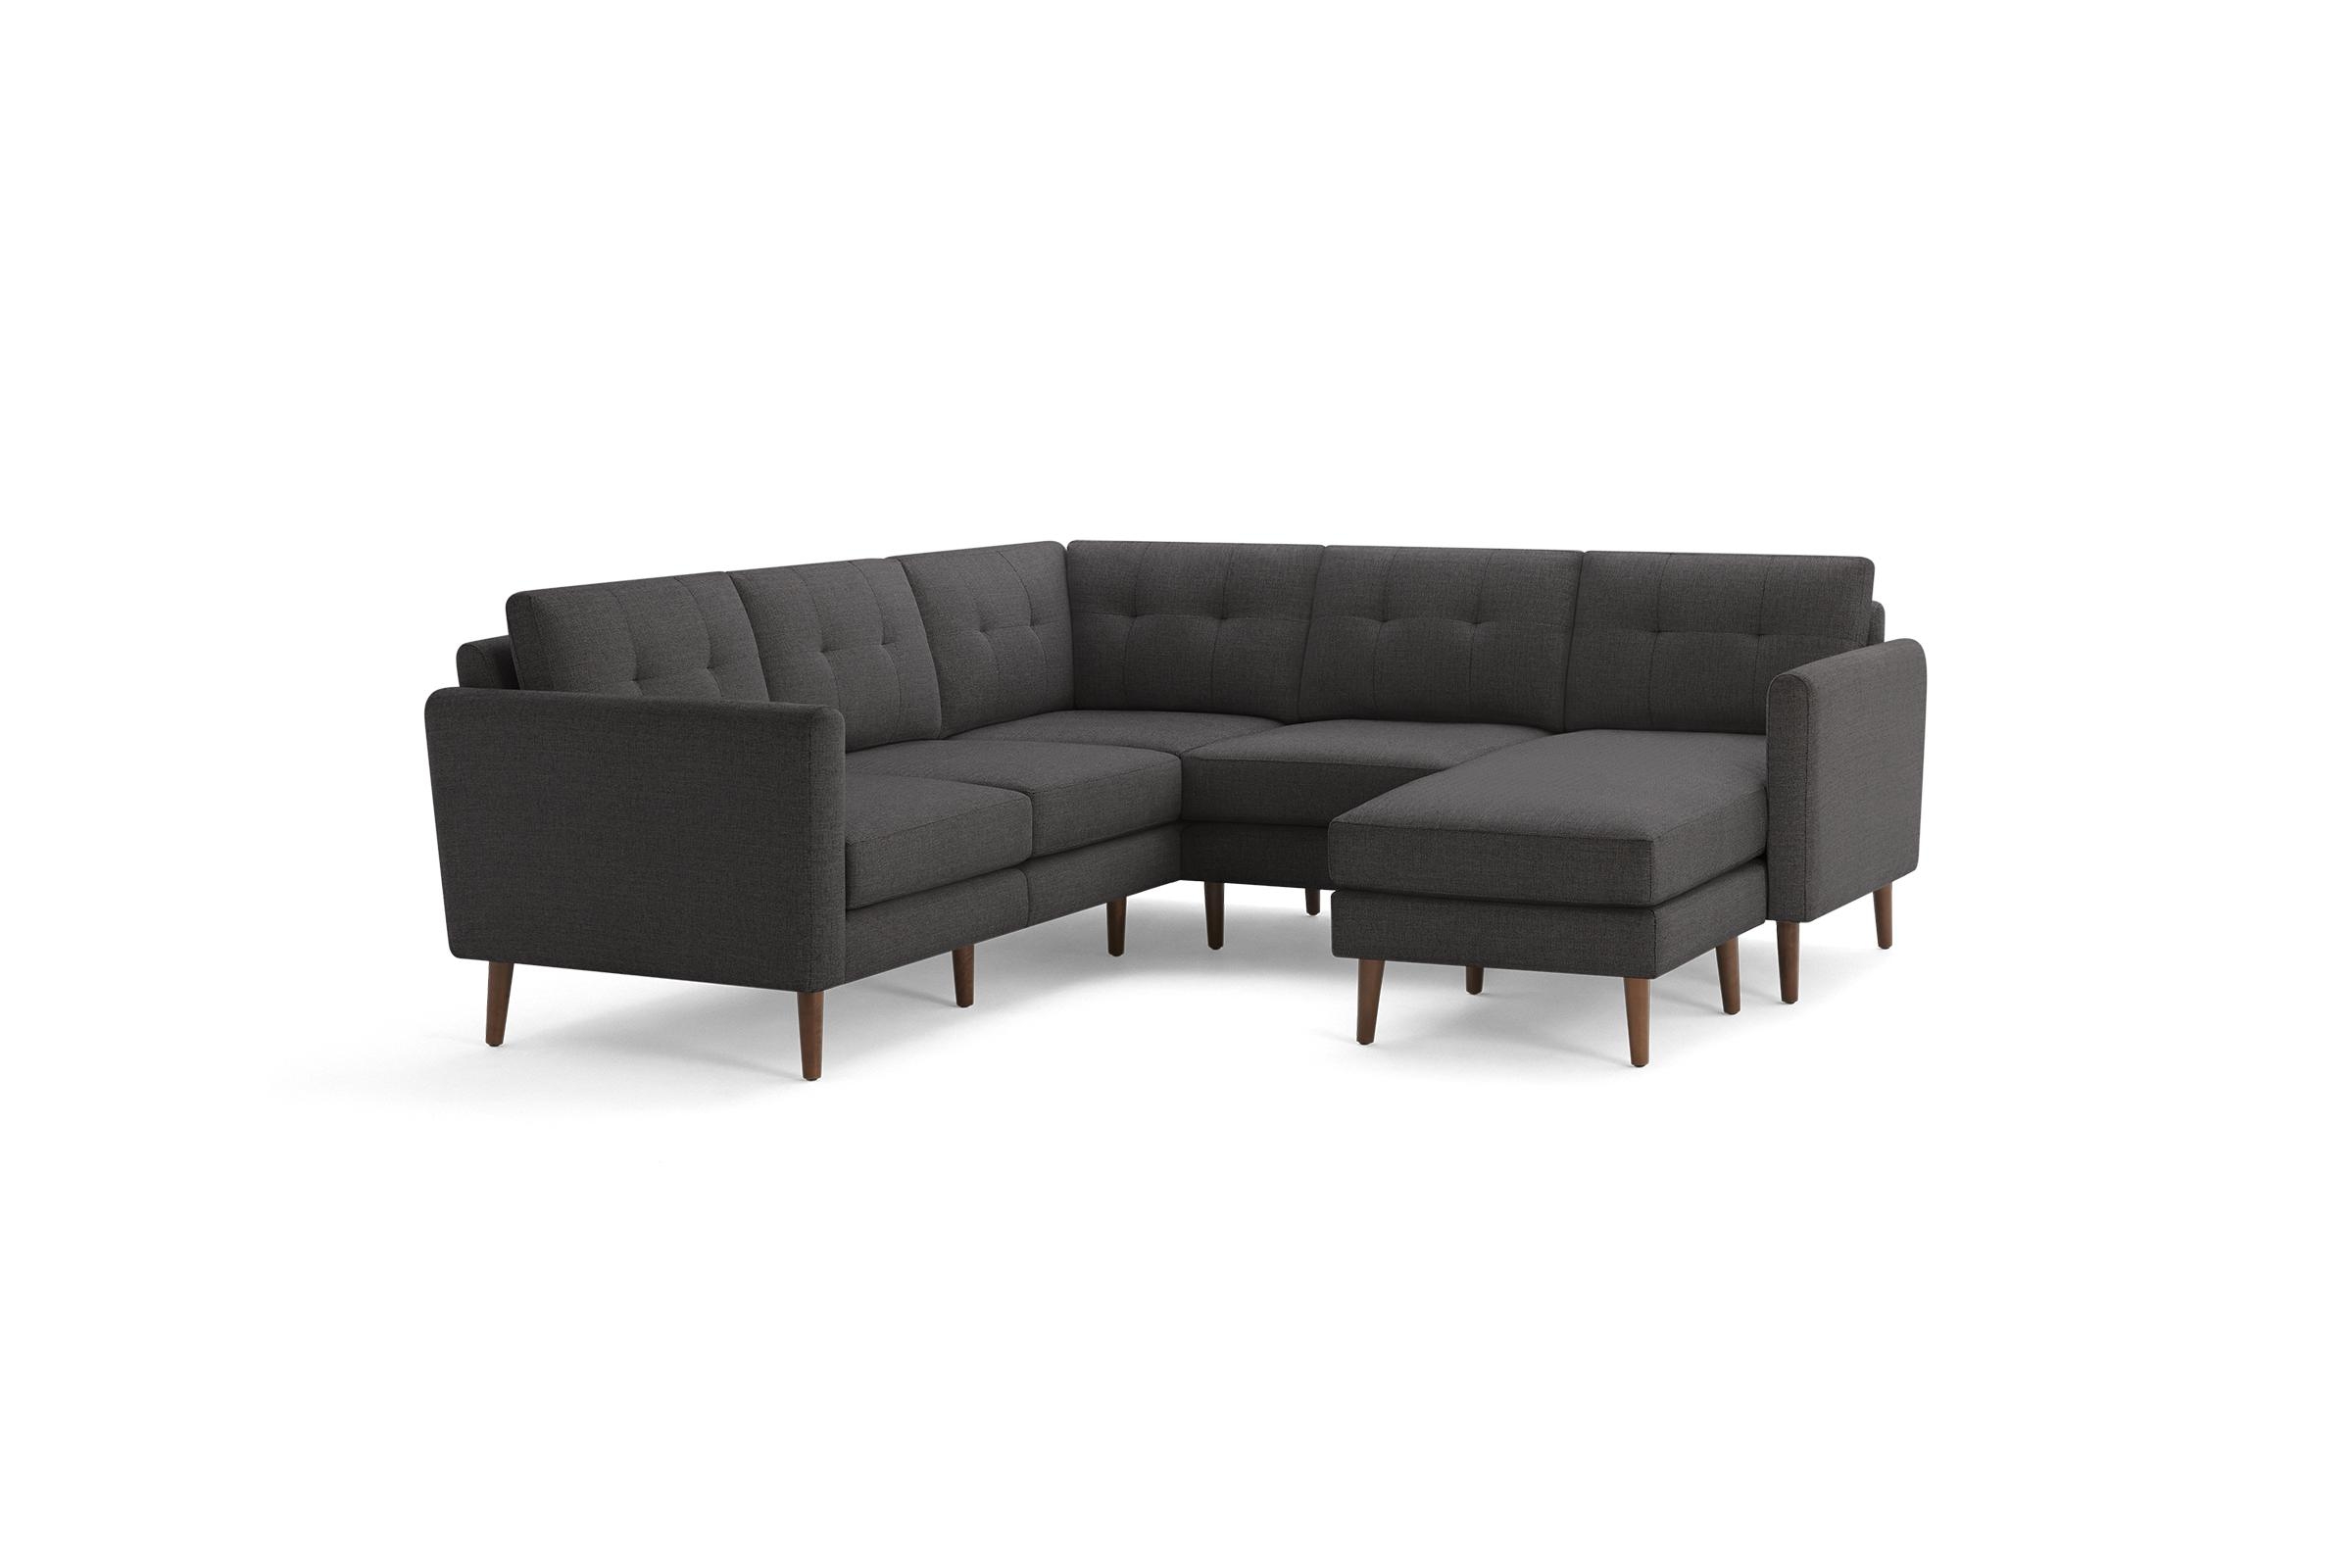 Nomad 5-Seat Corner Sectional with Chaise in Charcoal, Leg Finish: WalnutLegs - Image 0